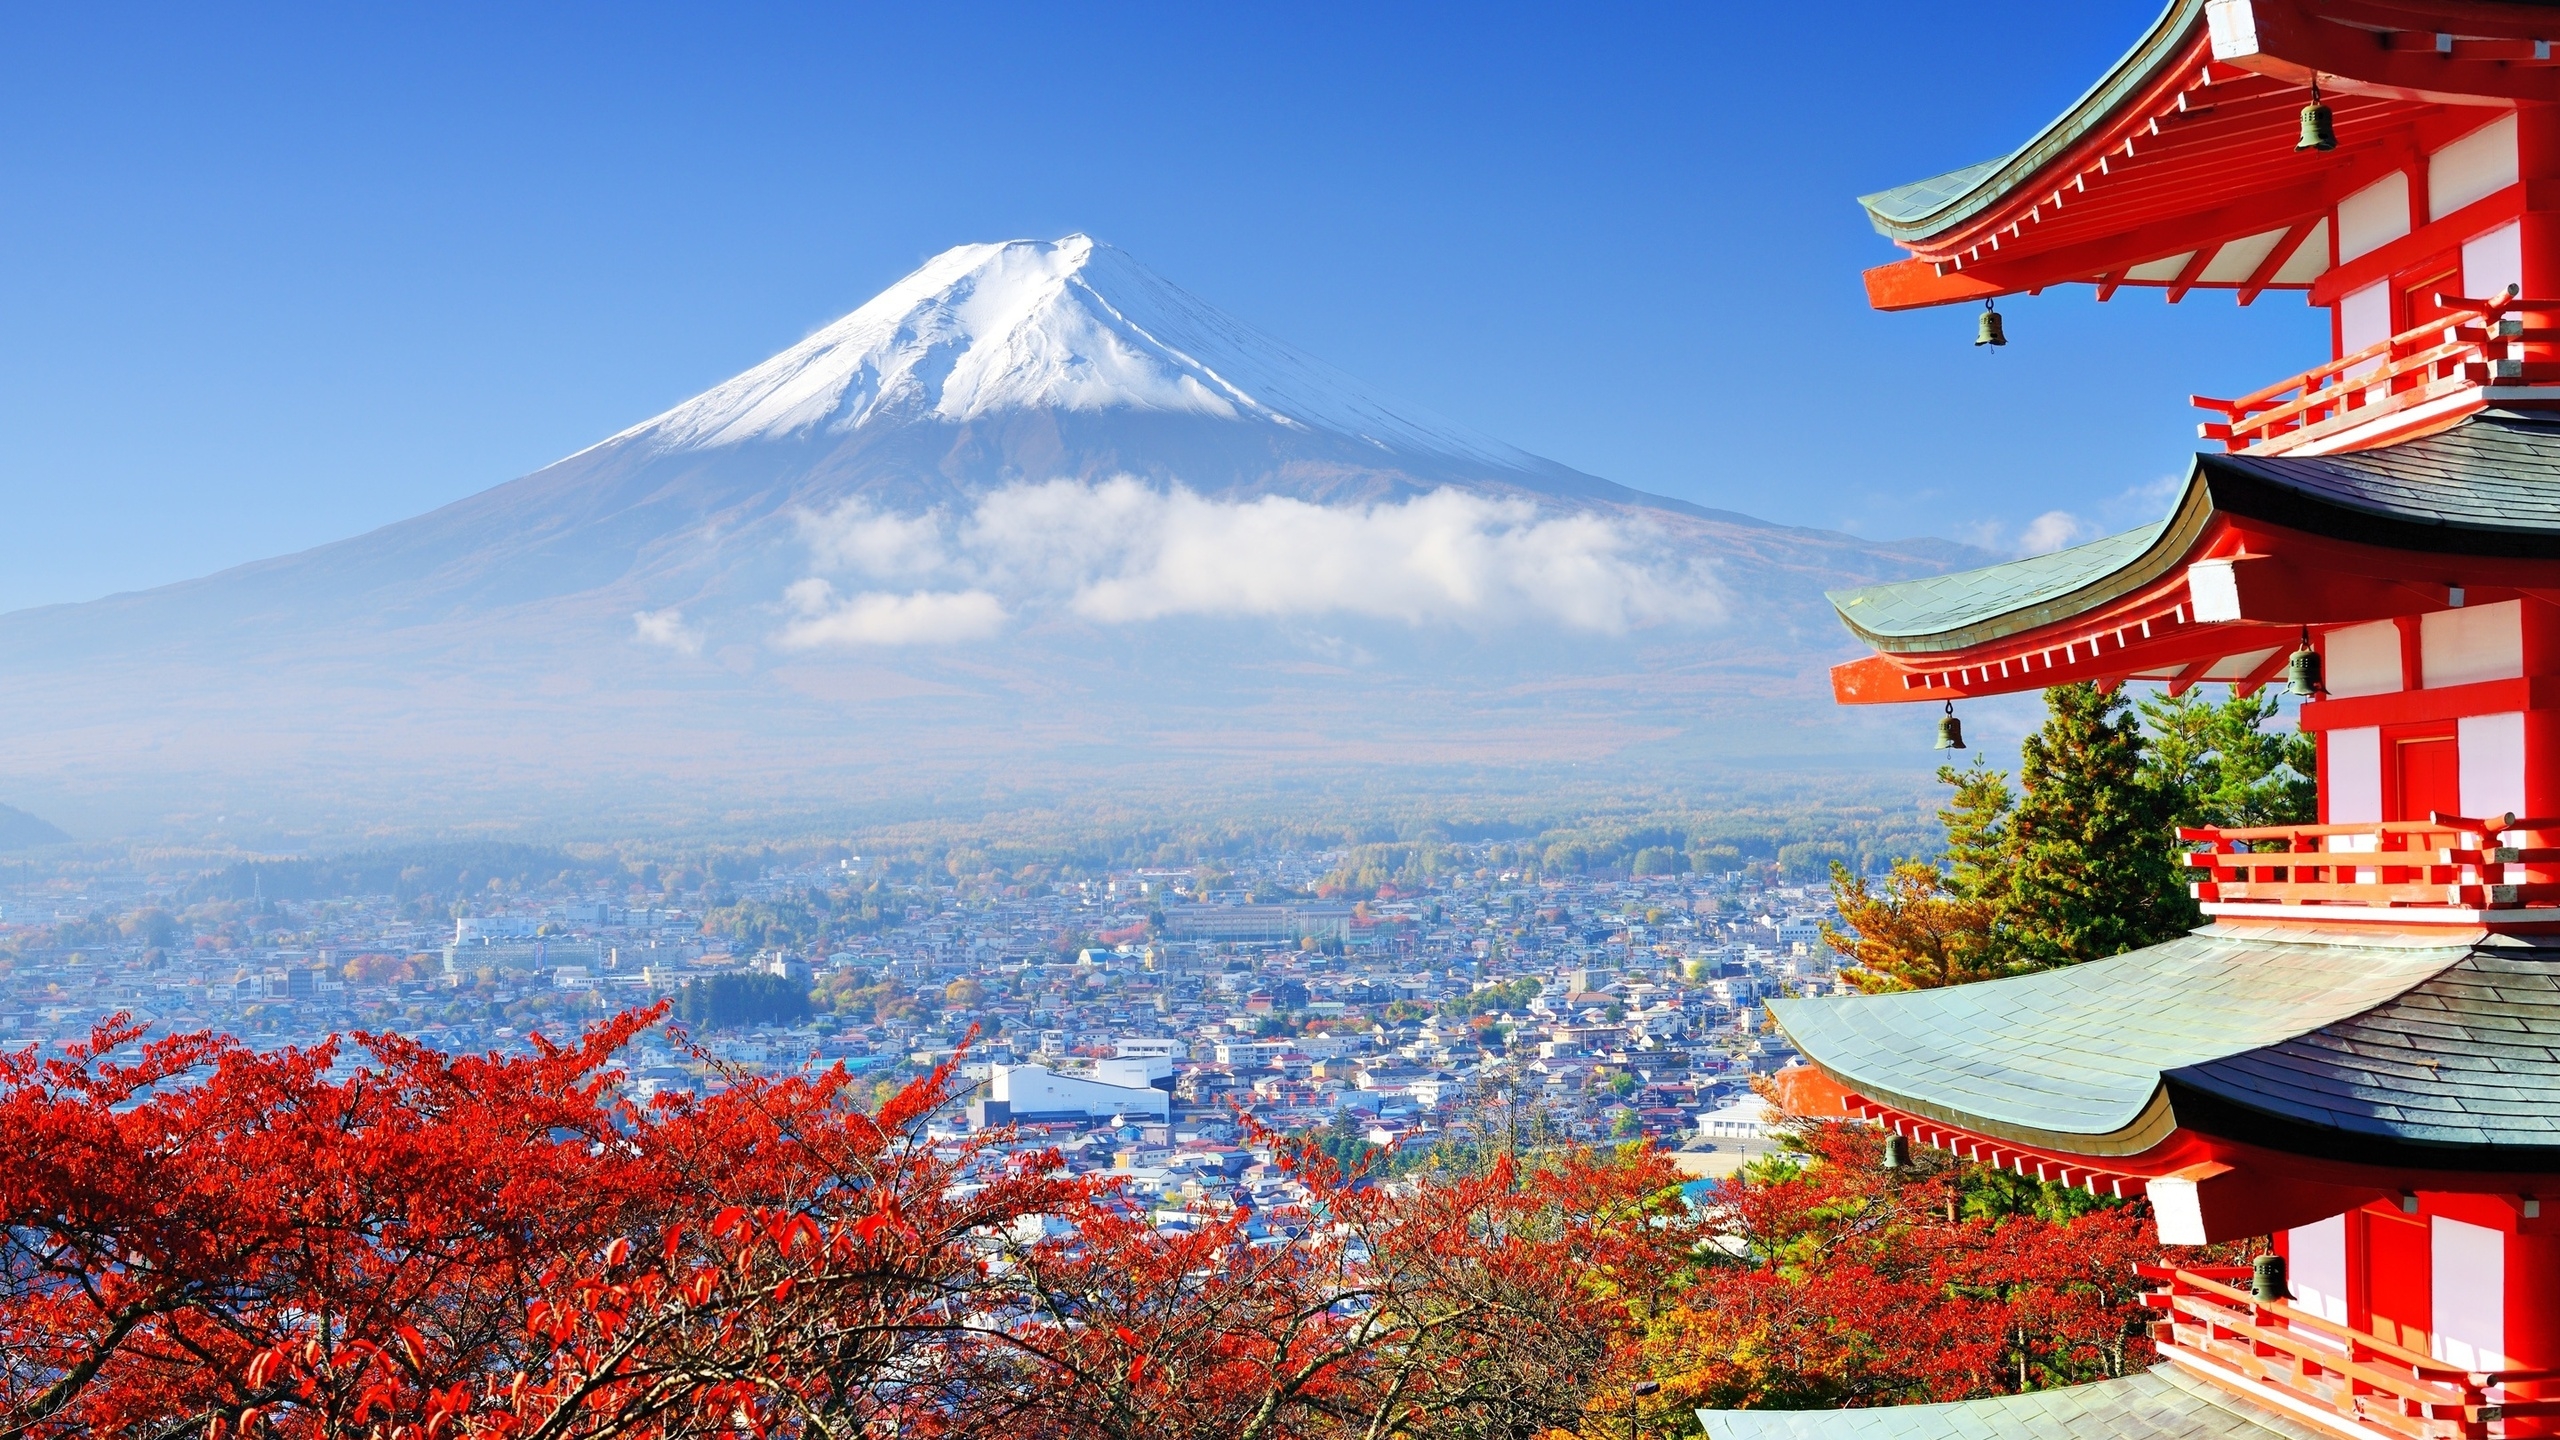 Fuji Mount in Japan for 2560x1440 HDTV resolution